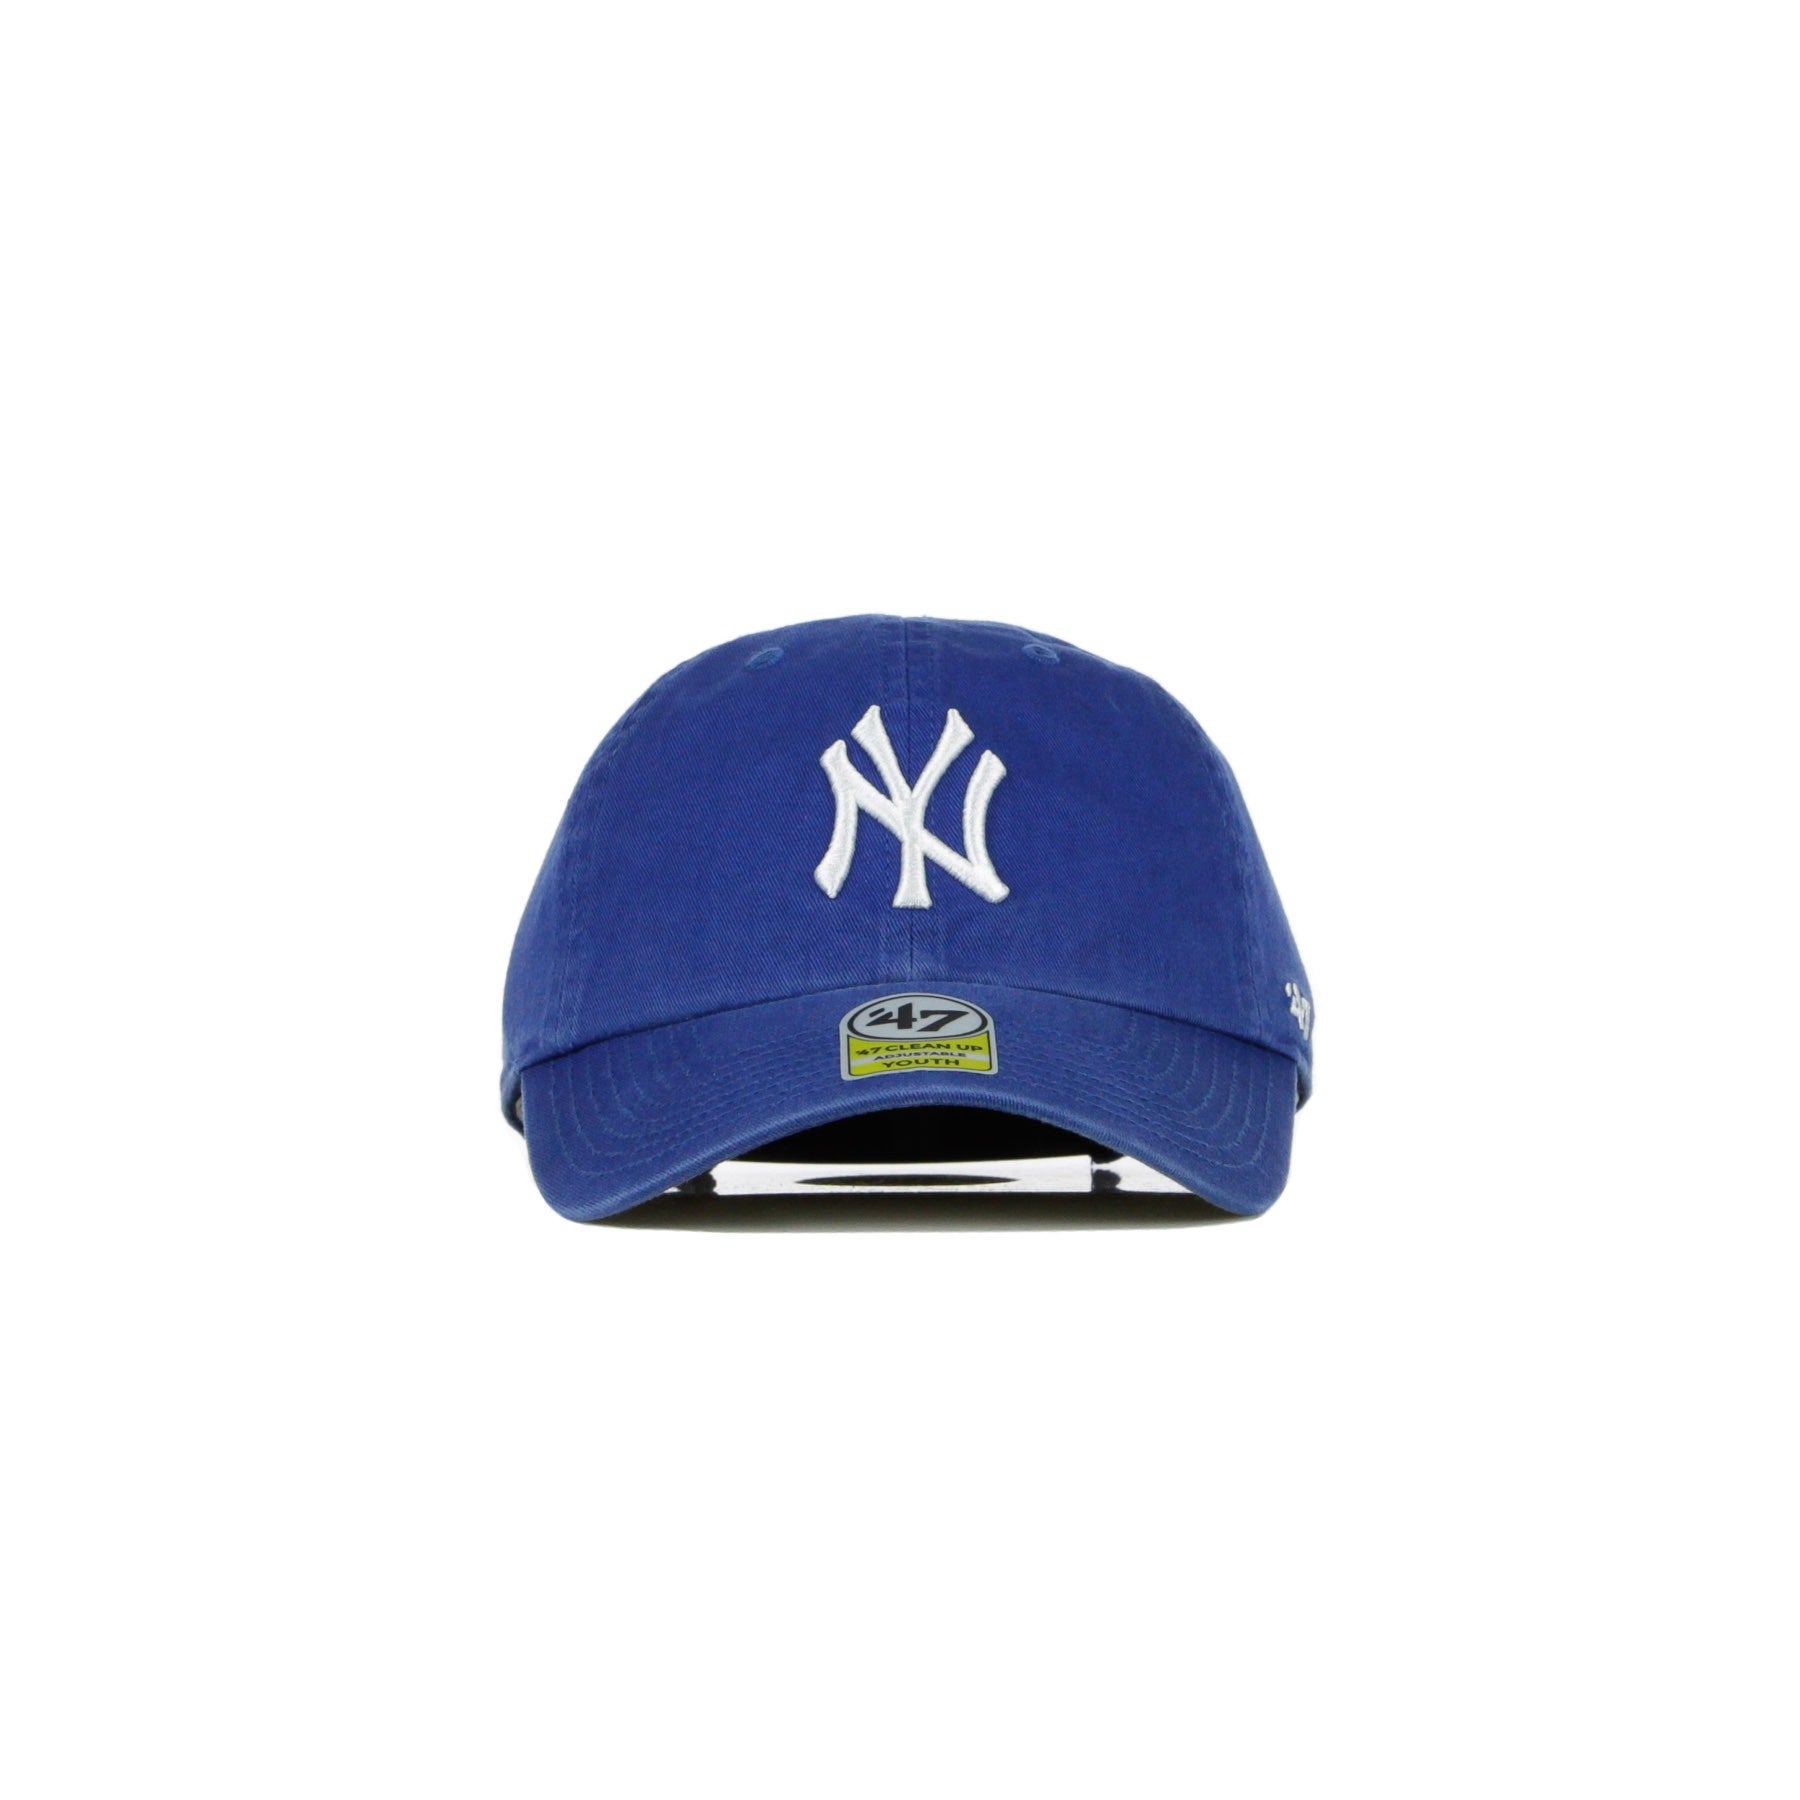 Curved Visor Cap for Boys Mlb Youth Clean Up Neyyan Royal/white